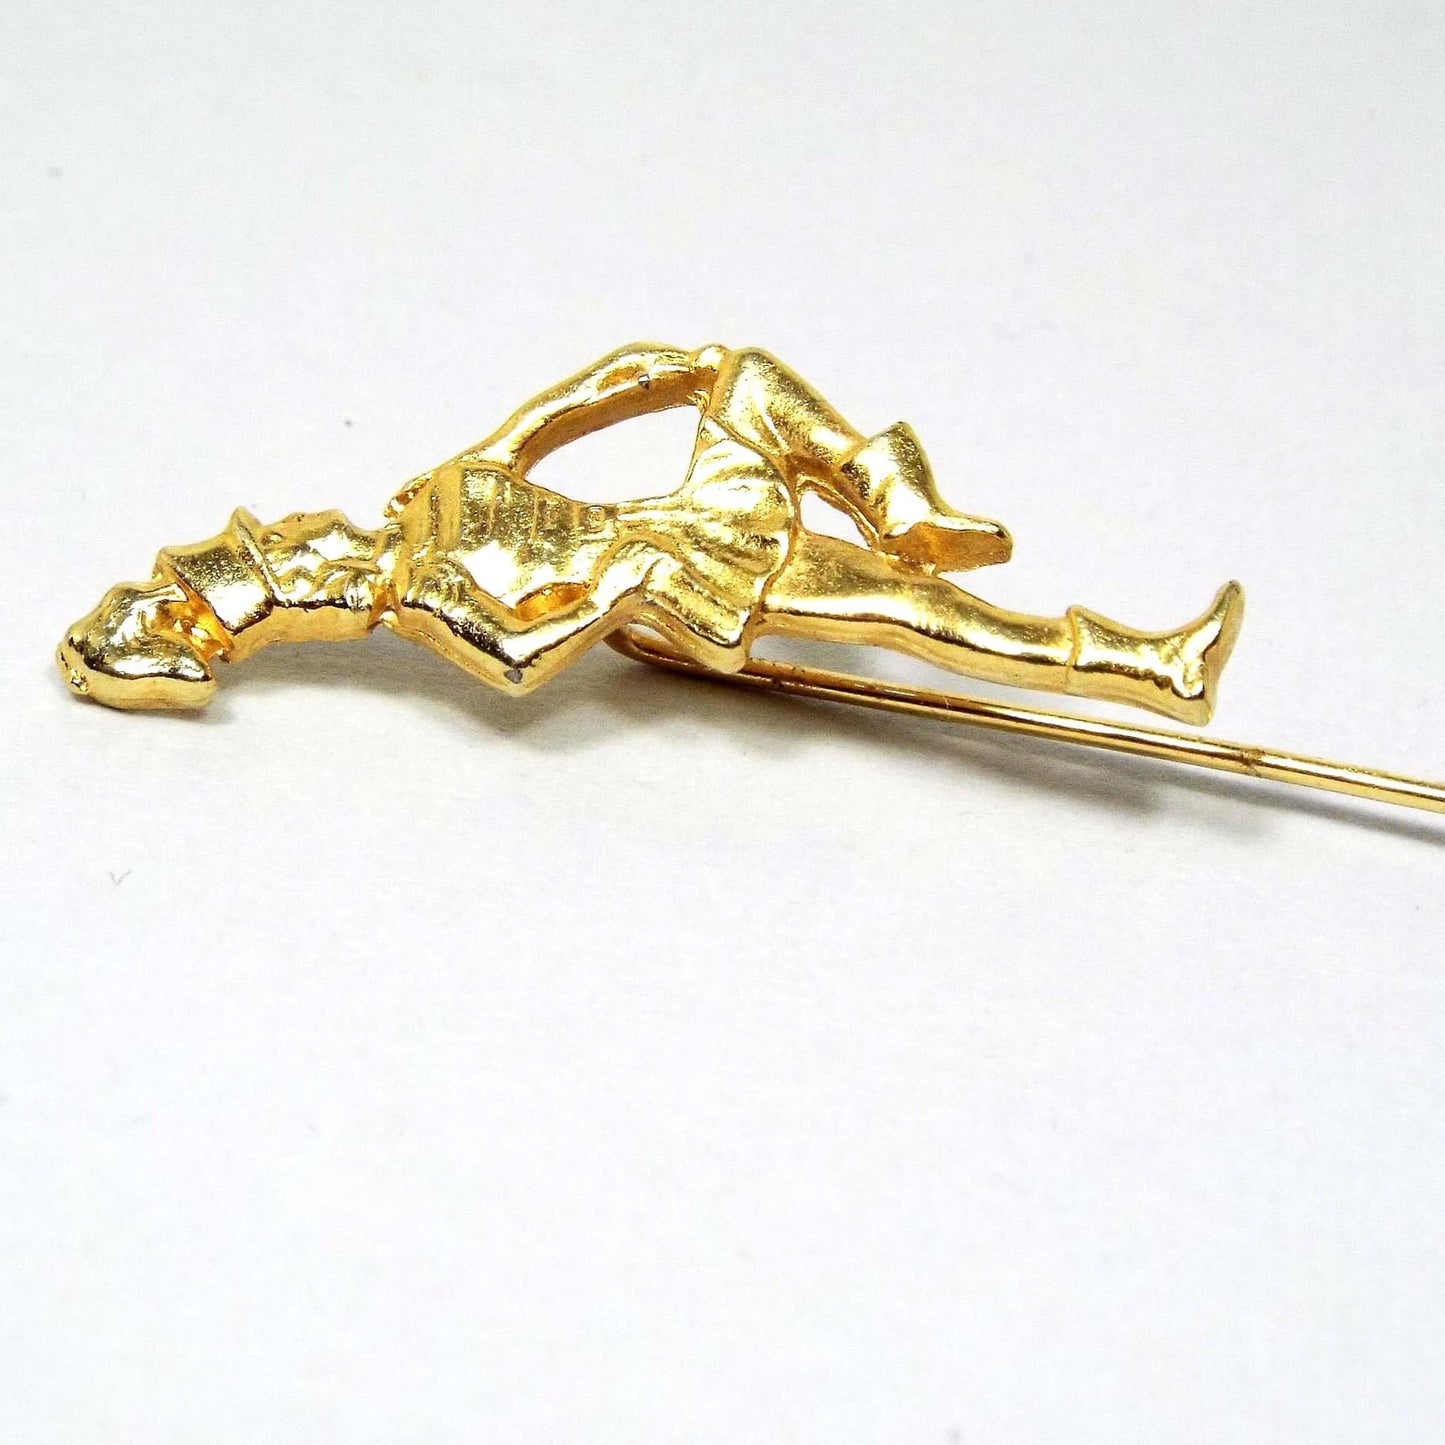 Enlarged top view of the Mid Century vintage marching band stick pin. The metal is gold tone in color. There is a girl in a marching band outfit holding a baton at the top.